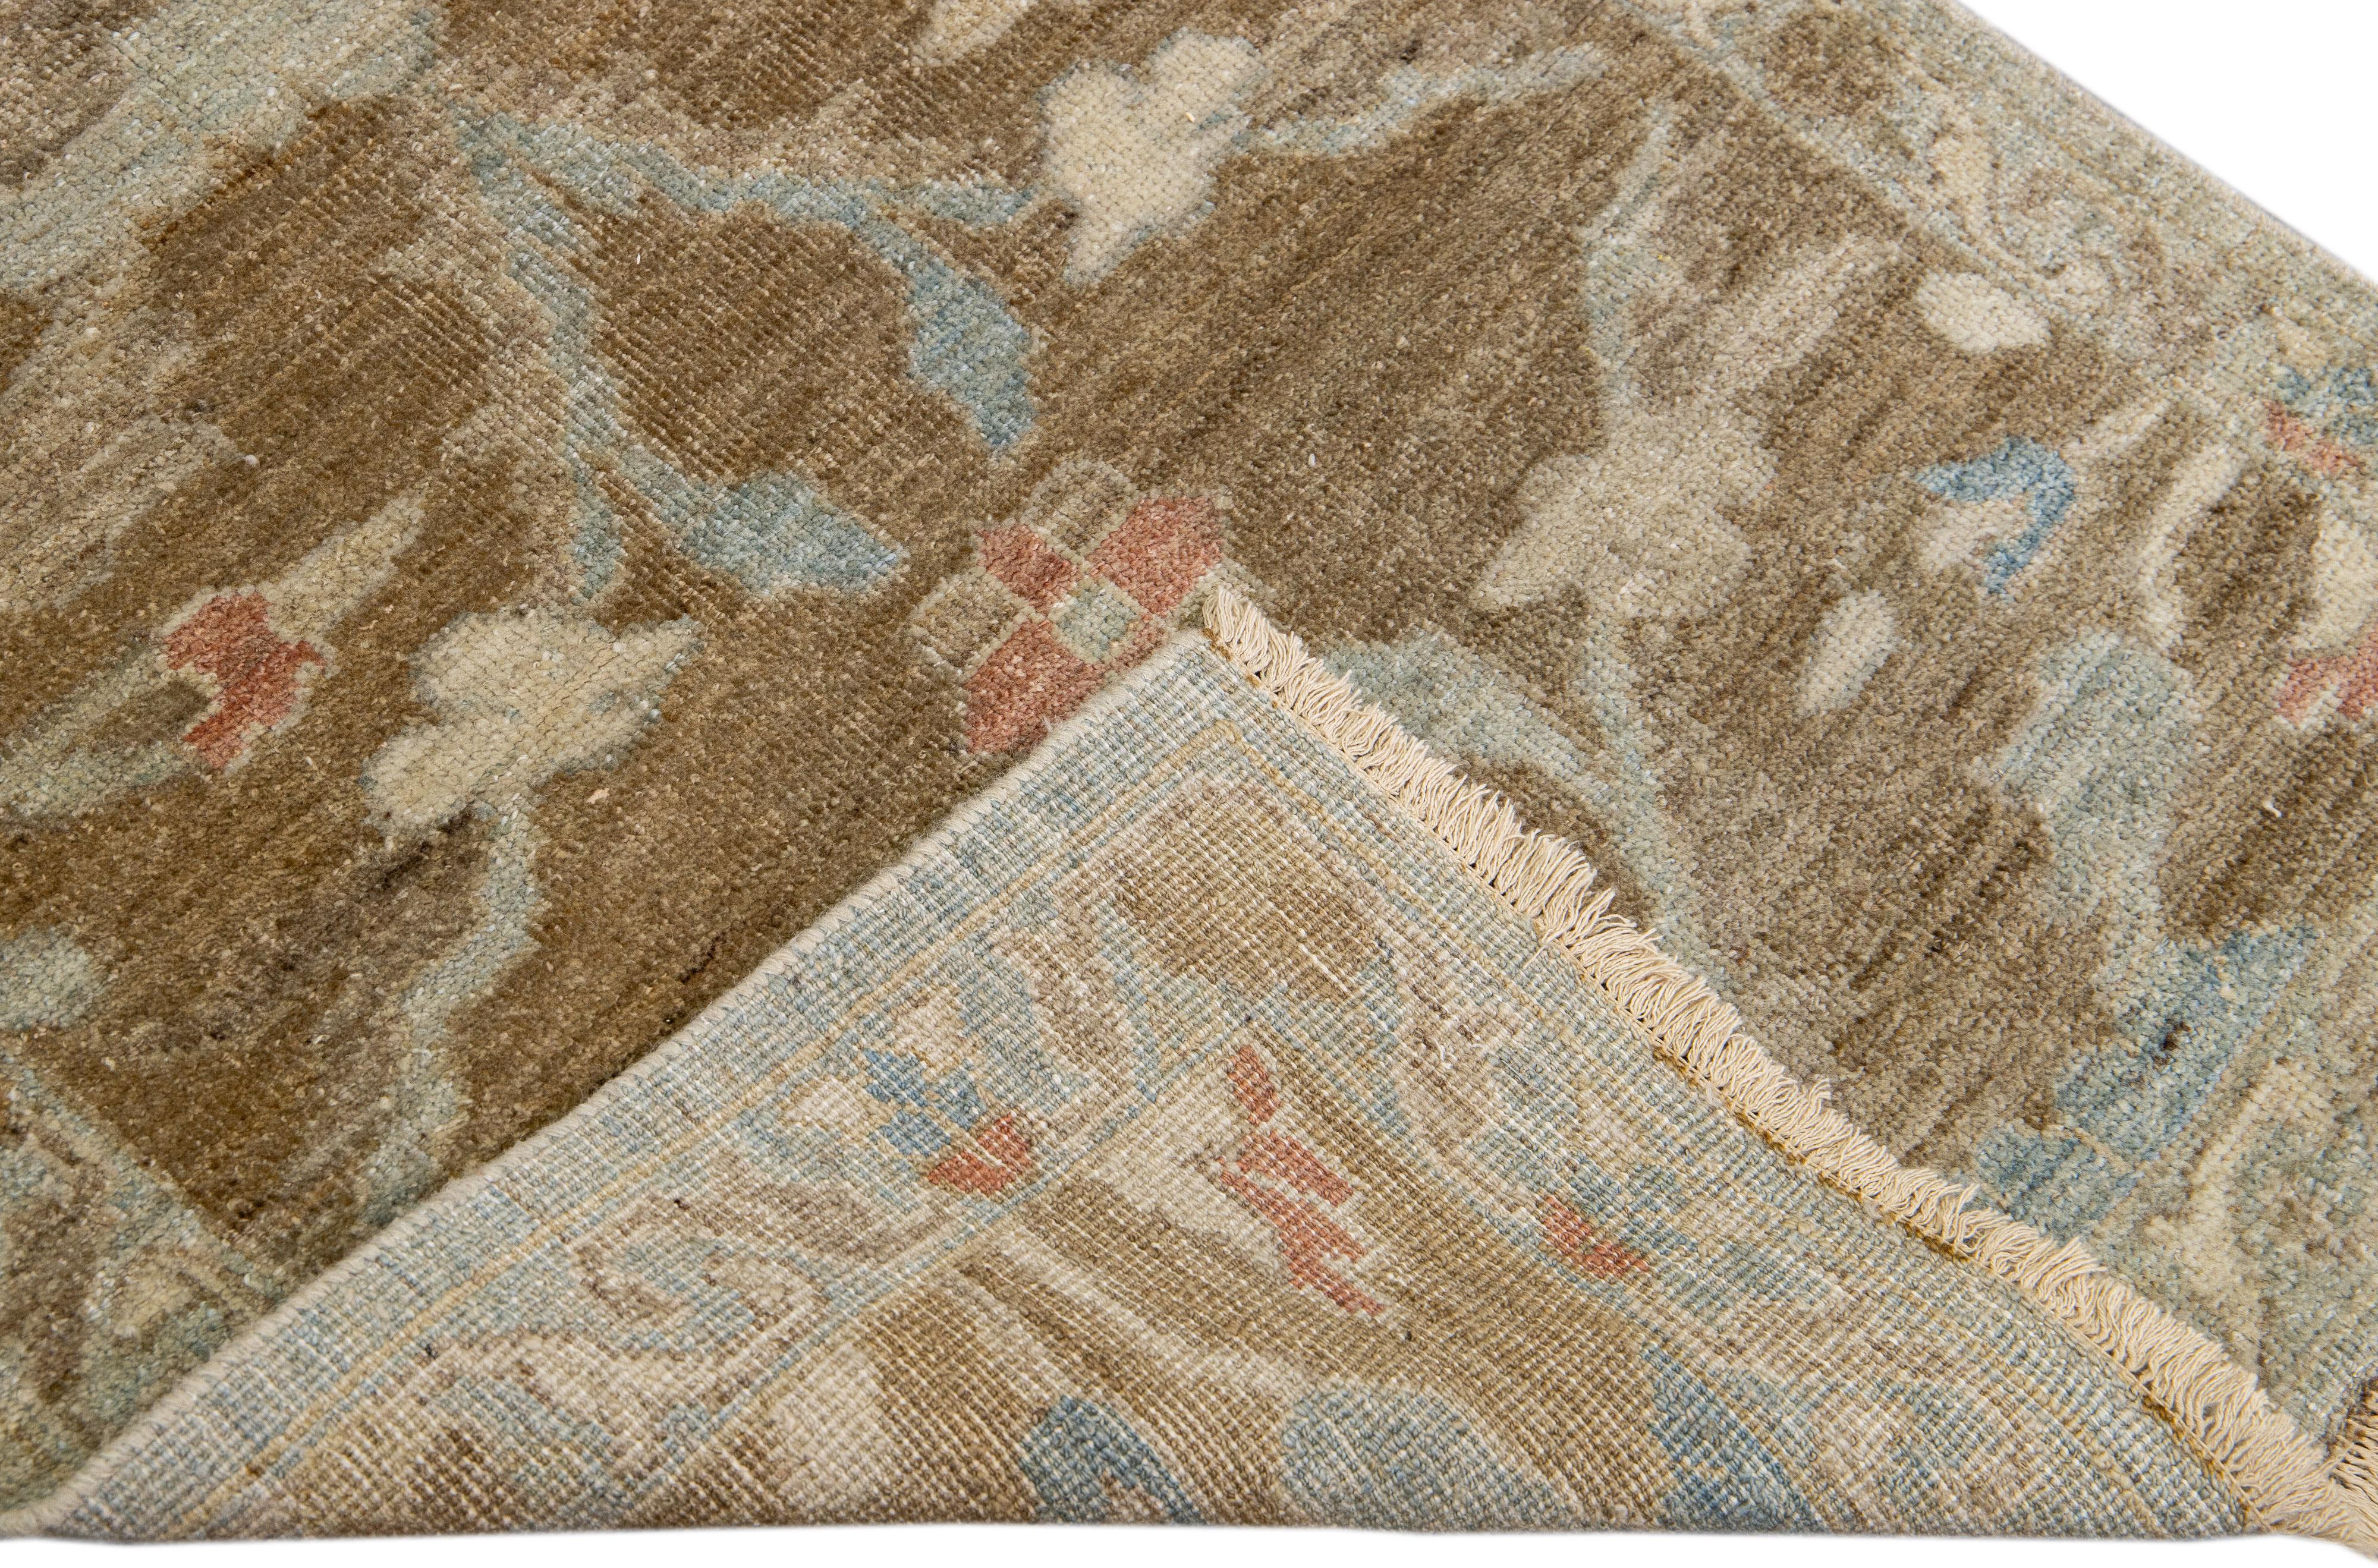 Beautiful modern Mahal hand-knotted wool runner with a brown field. This Piece has multicolor accents in a gorgeous all-over Classic floral design.

This rug measures: 3'2'' x 25'10